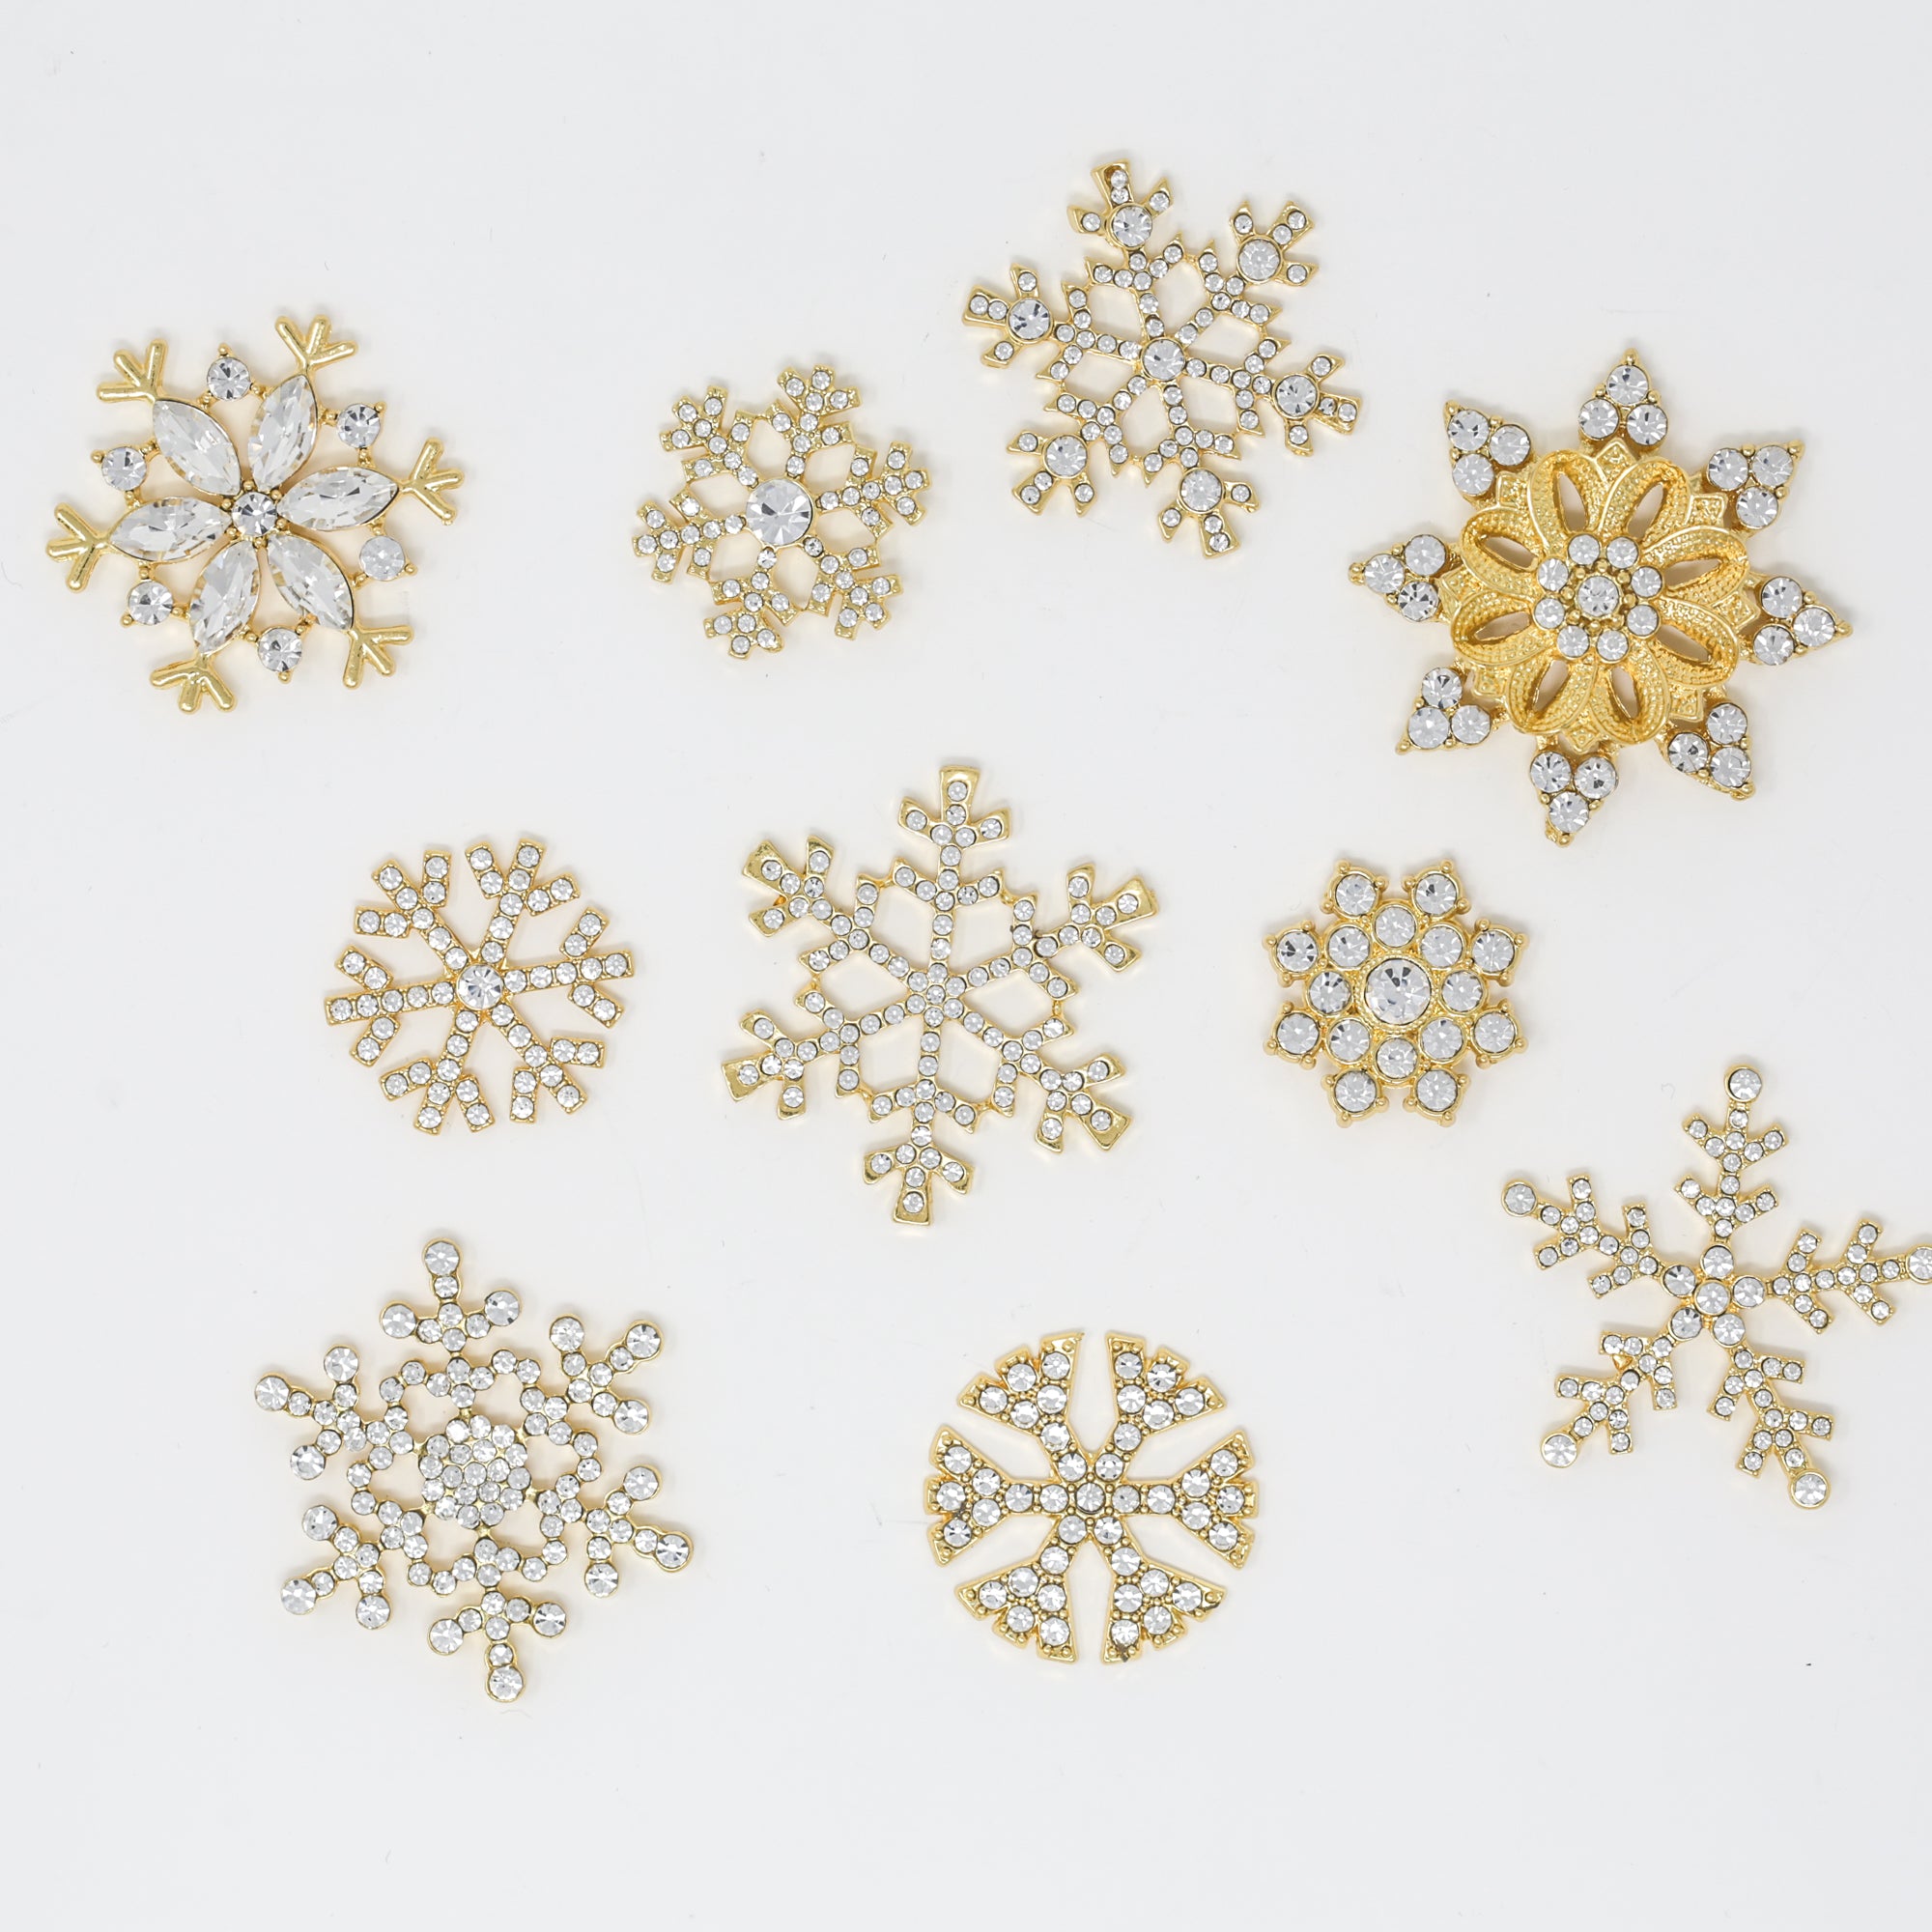 Gold Snowflake Pack - Totally Dazzled